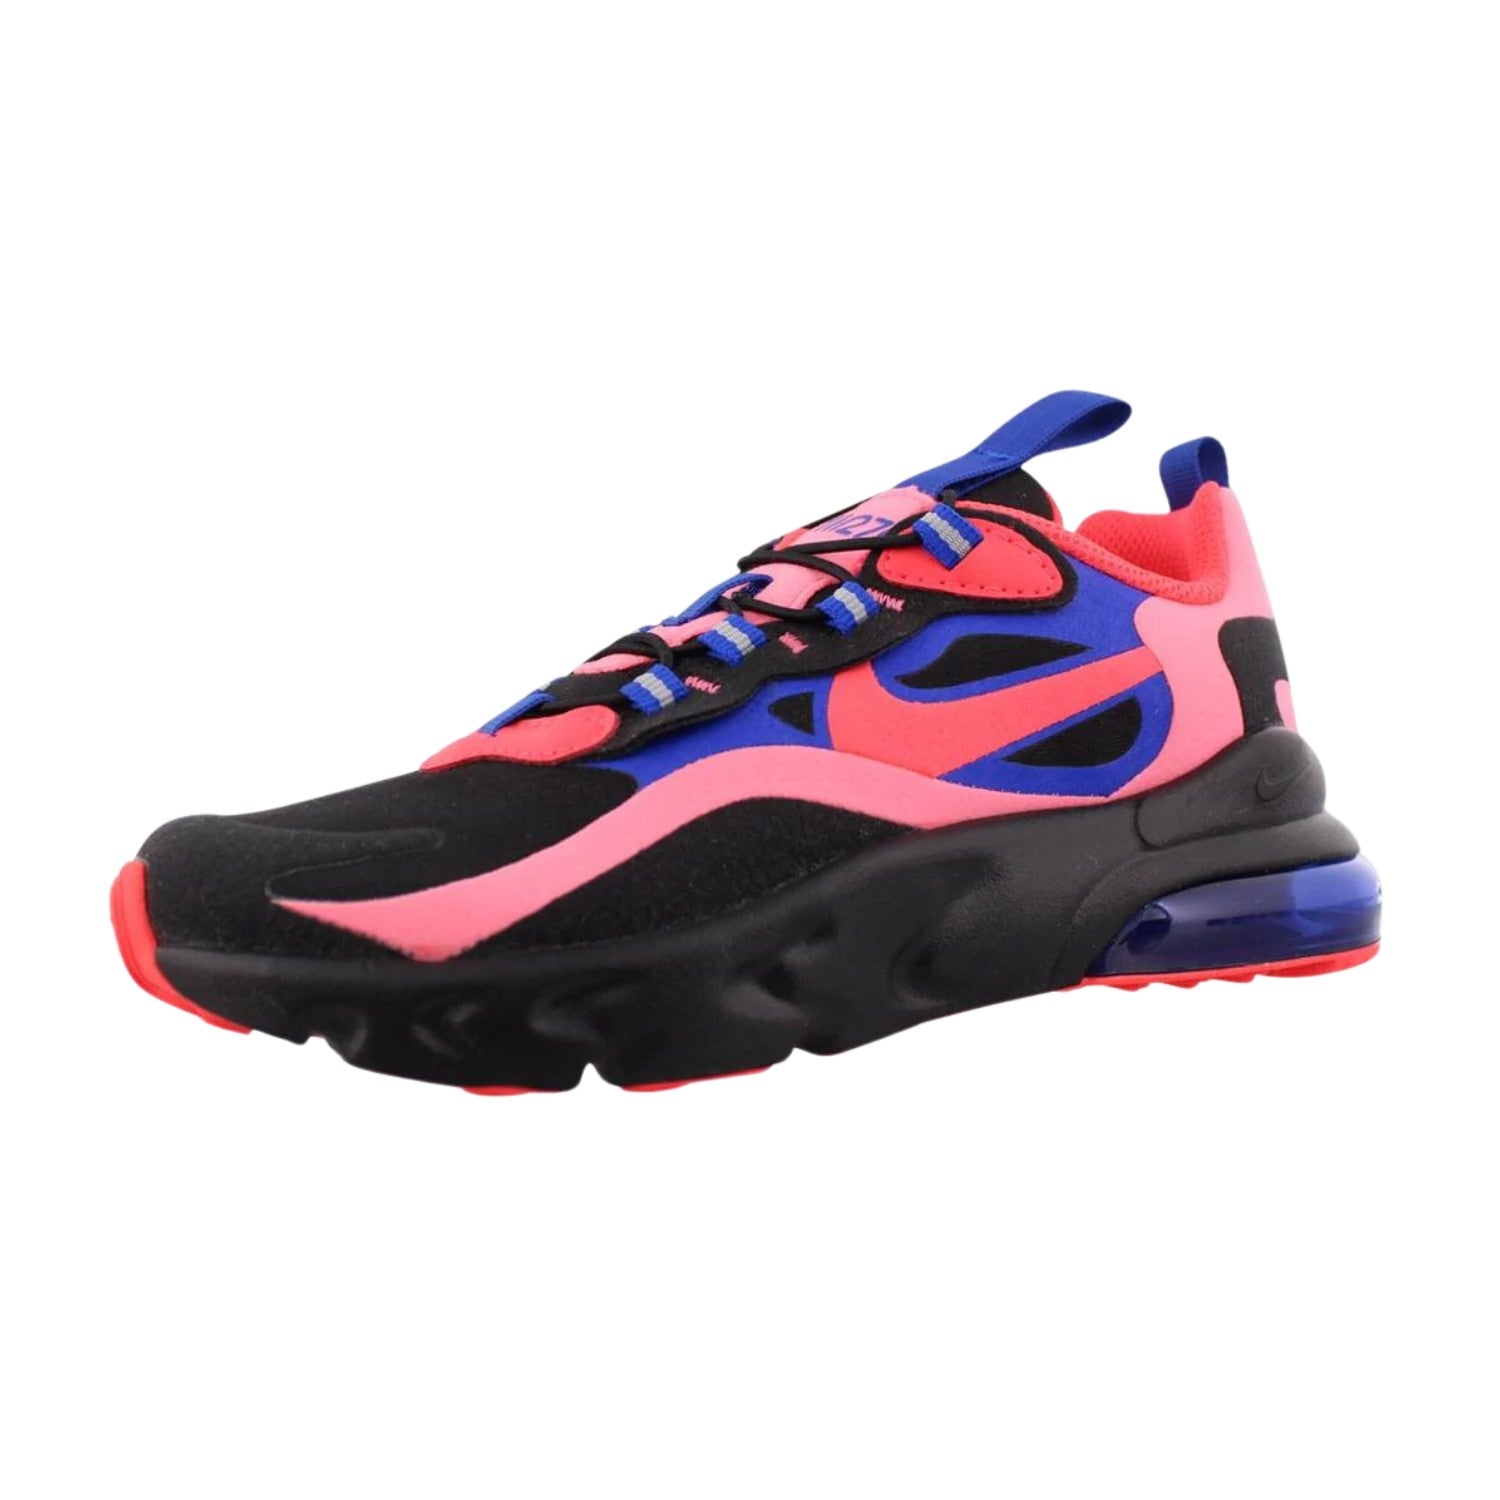 Nike Air Amx 270 Rt (Ps) Little Kids Style : Ct1733